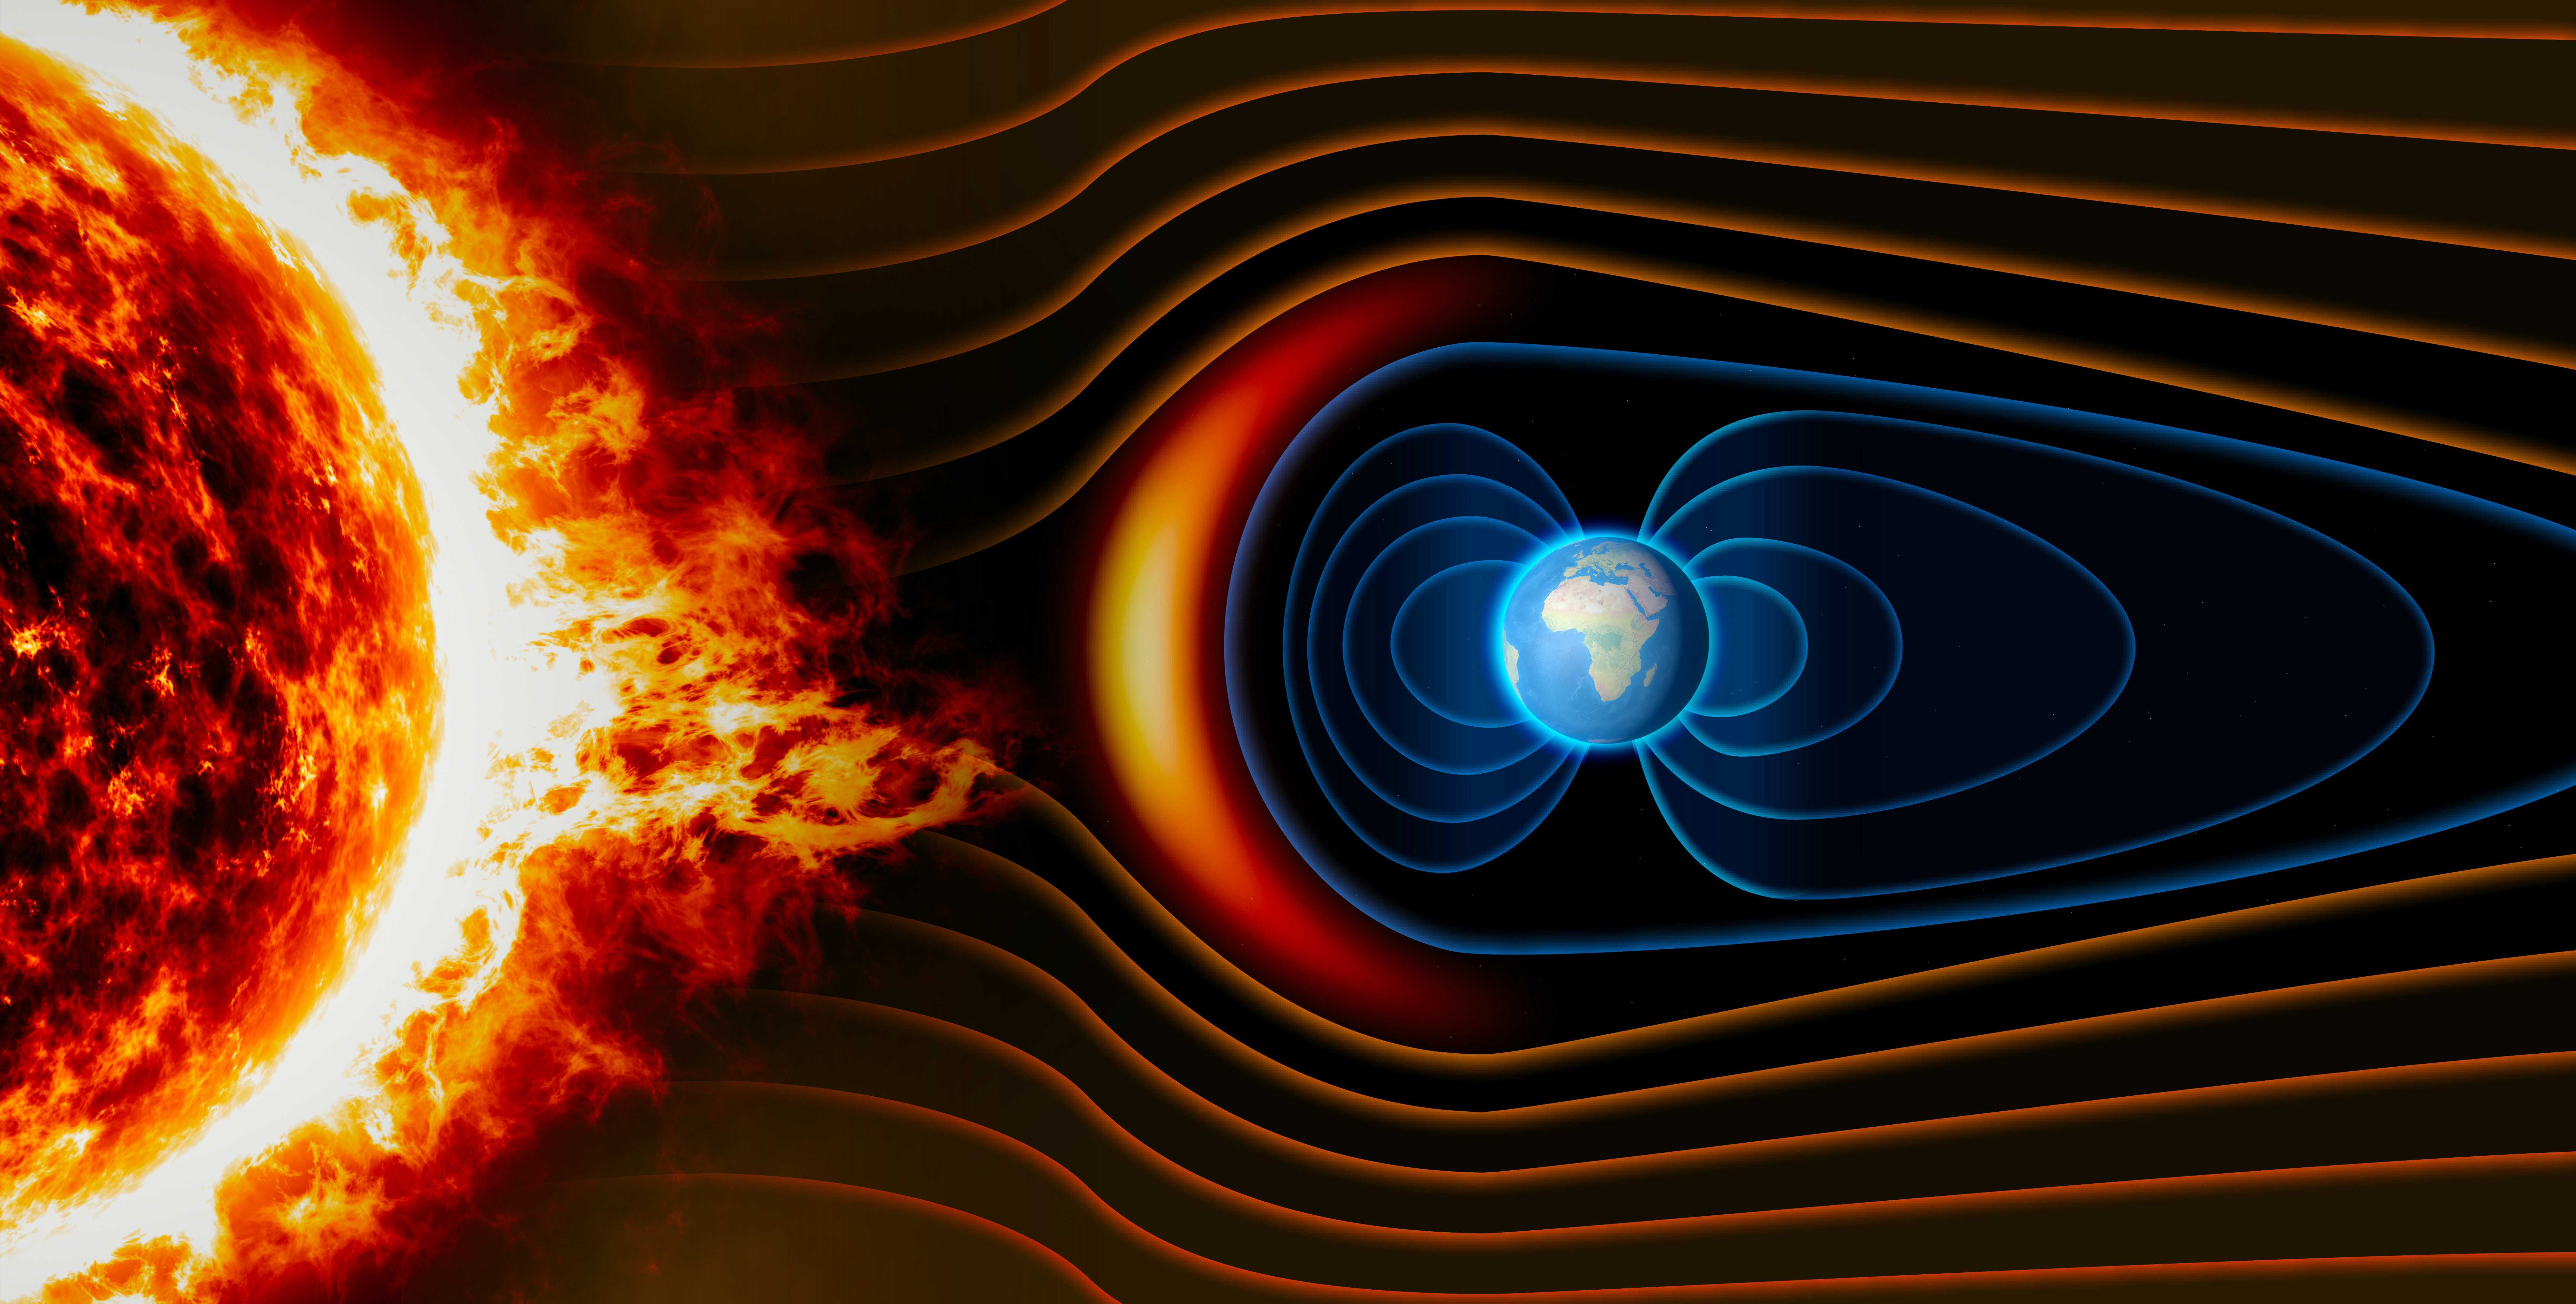 Illustration showing the Earth's magnetic field protecting the planet.